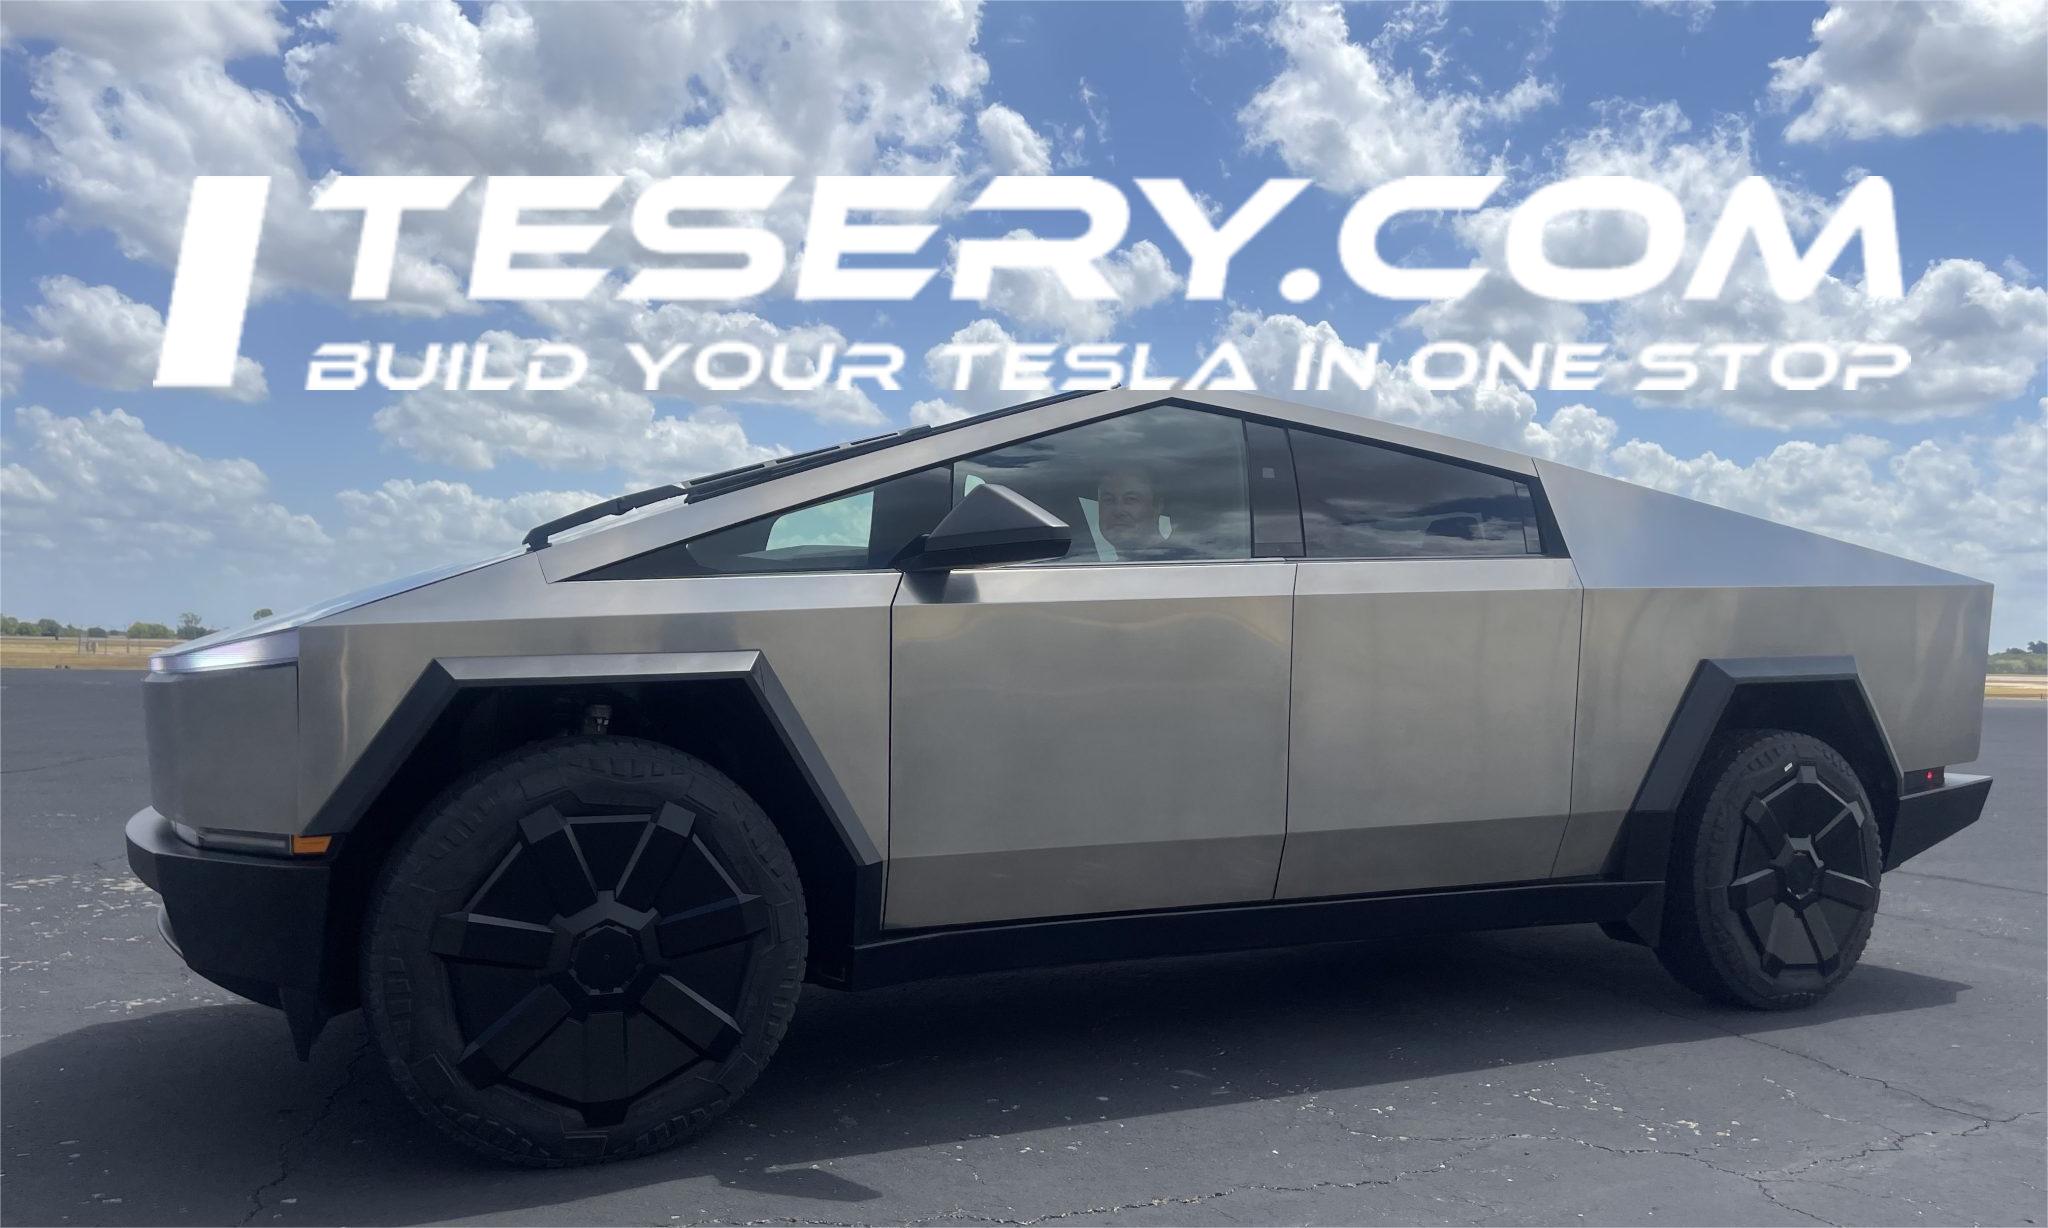 First Glimpse of Tesla's Production-Ready Cybertruck: Elon Musk Shares Exciting Preview - Tesery Official Store